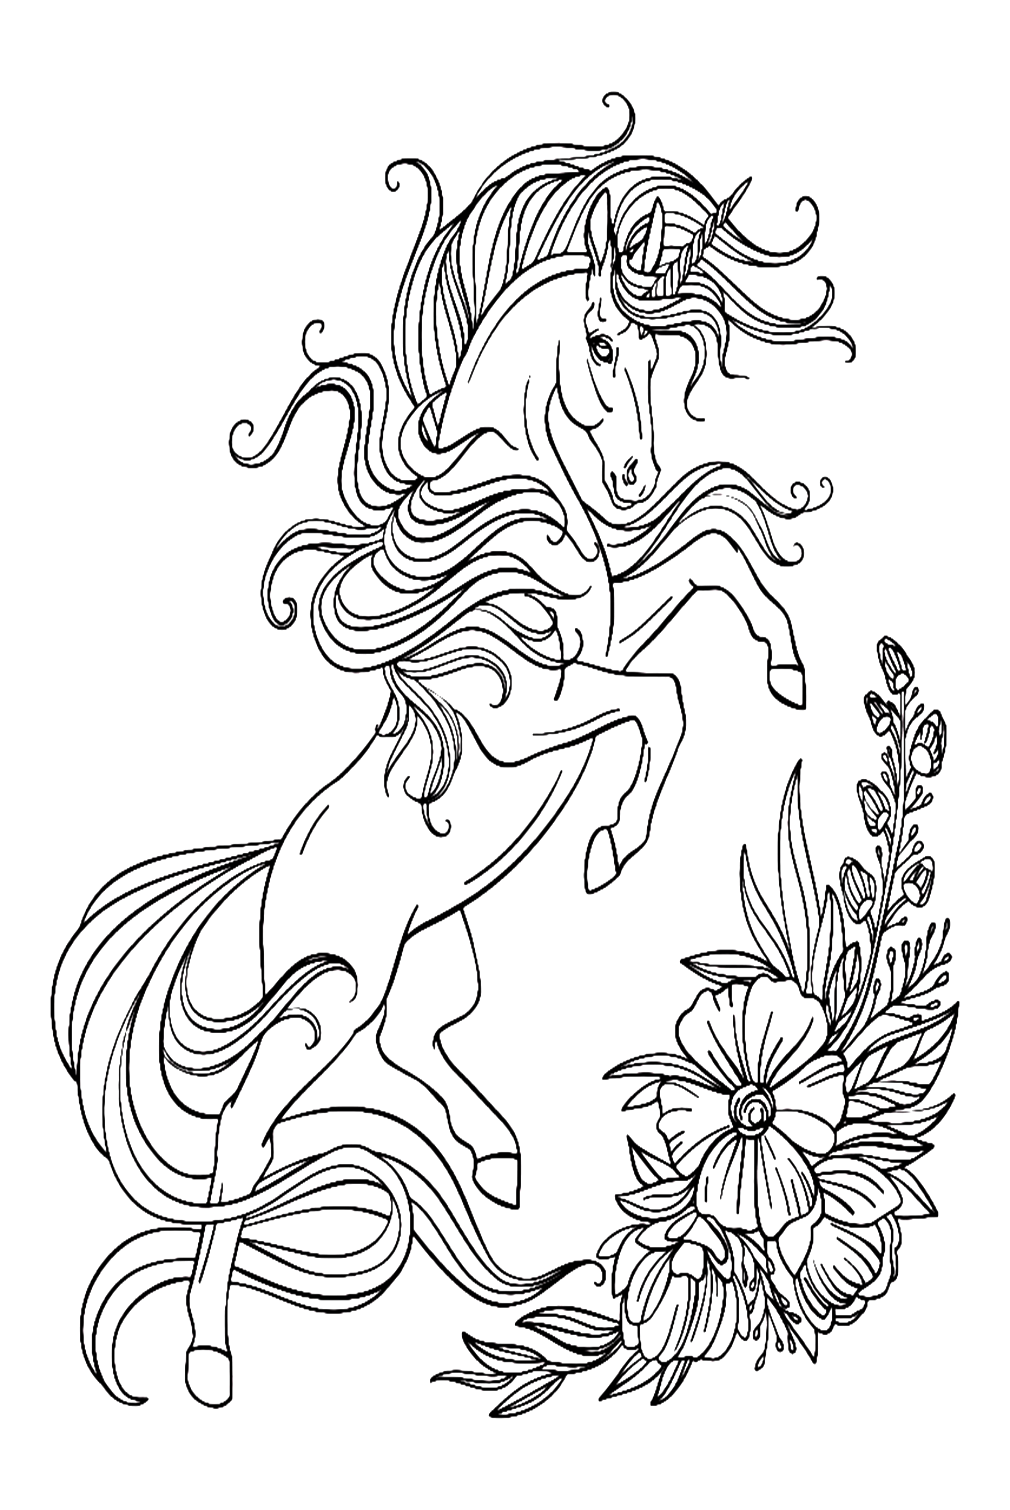 Unicorn Coloring Pages Free from Unicorn